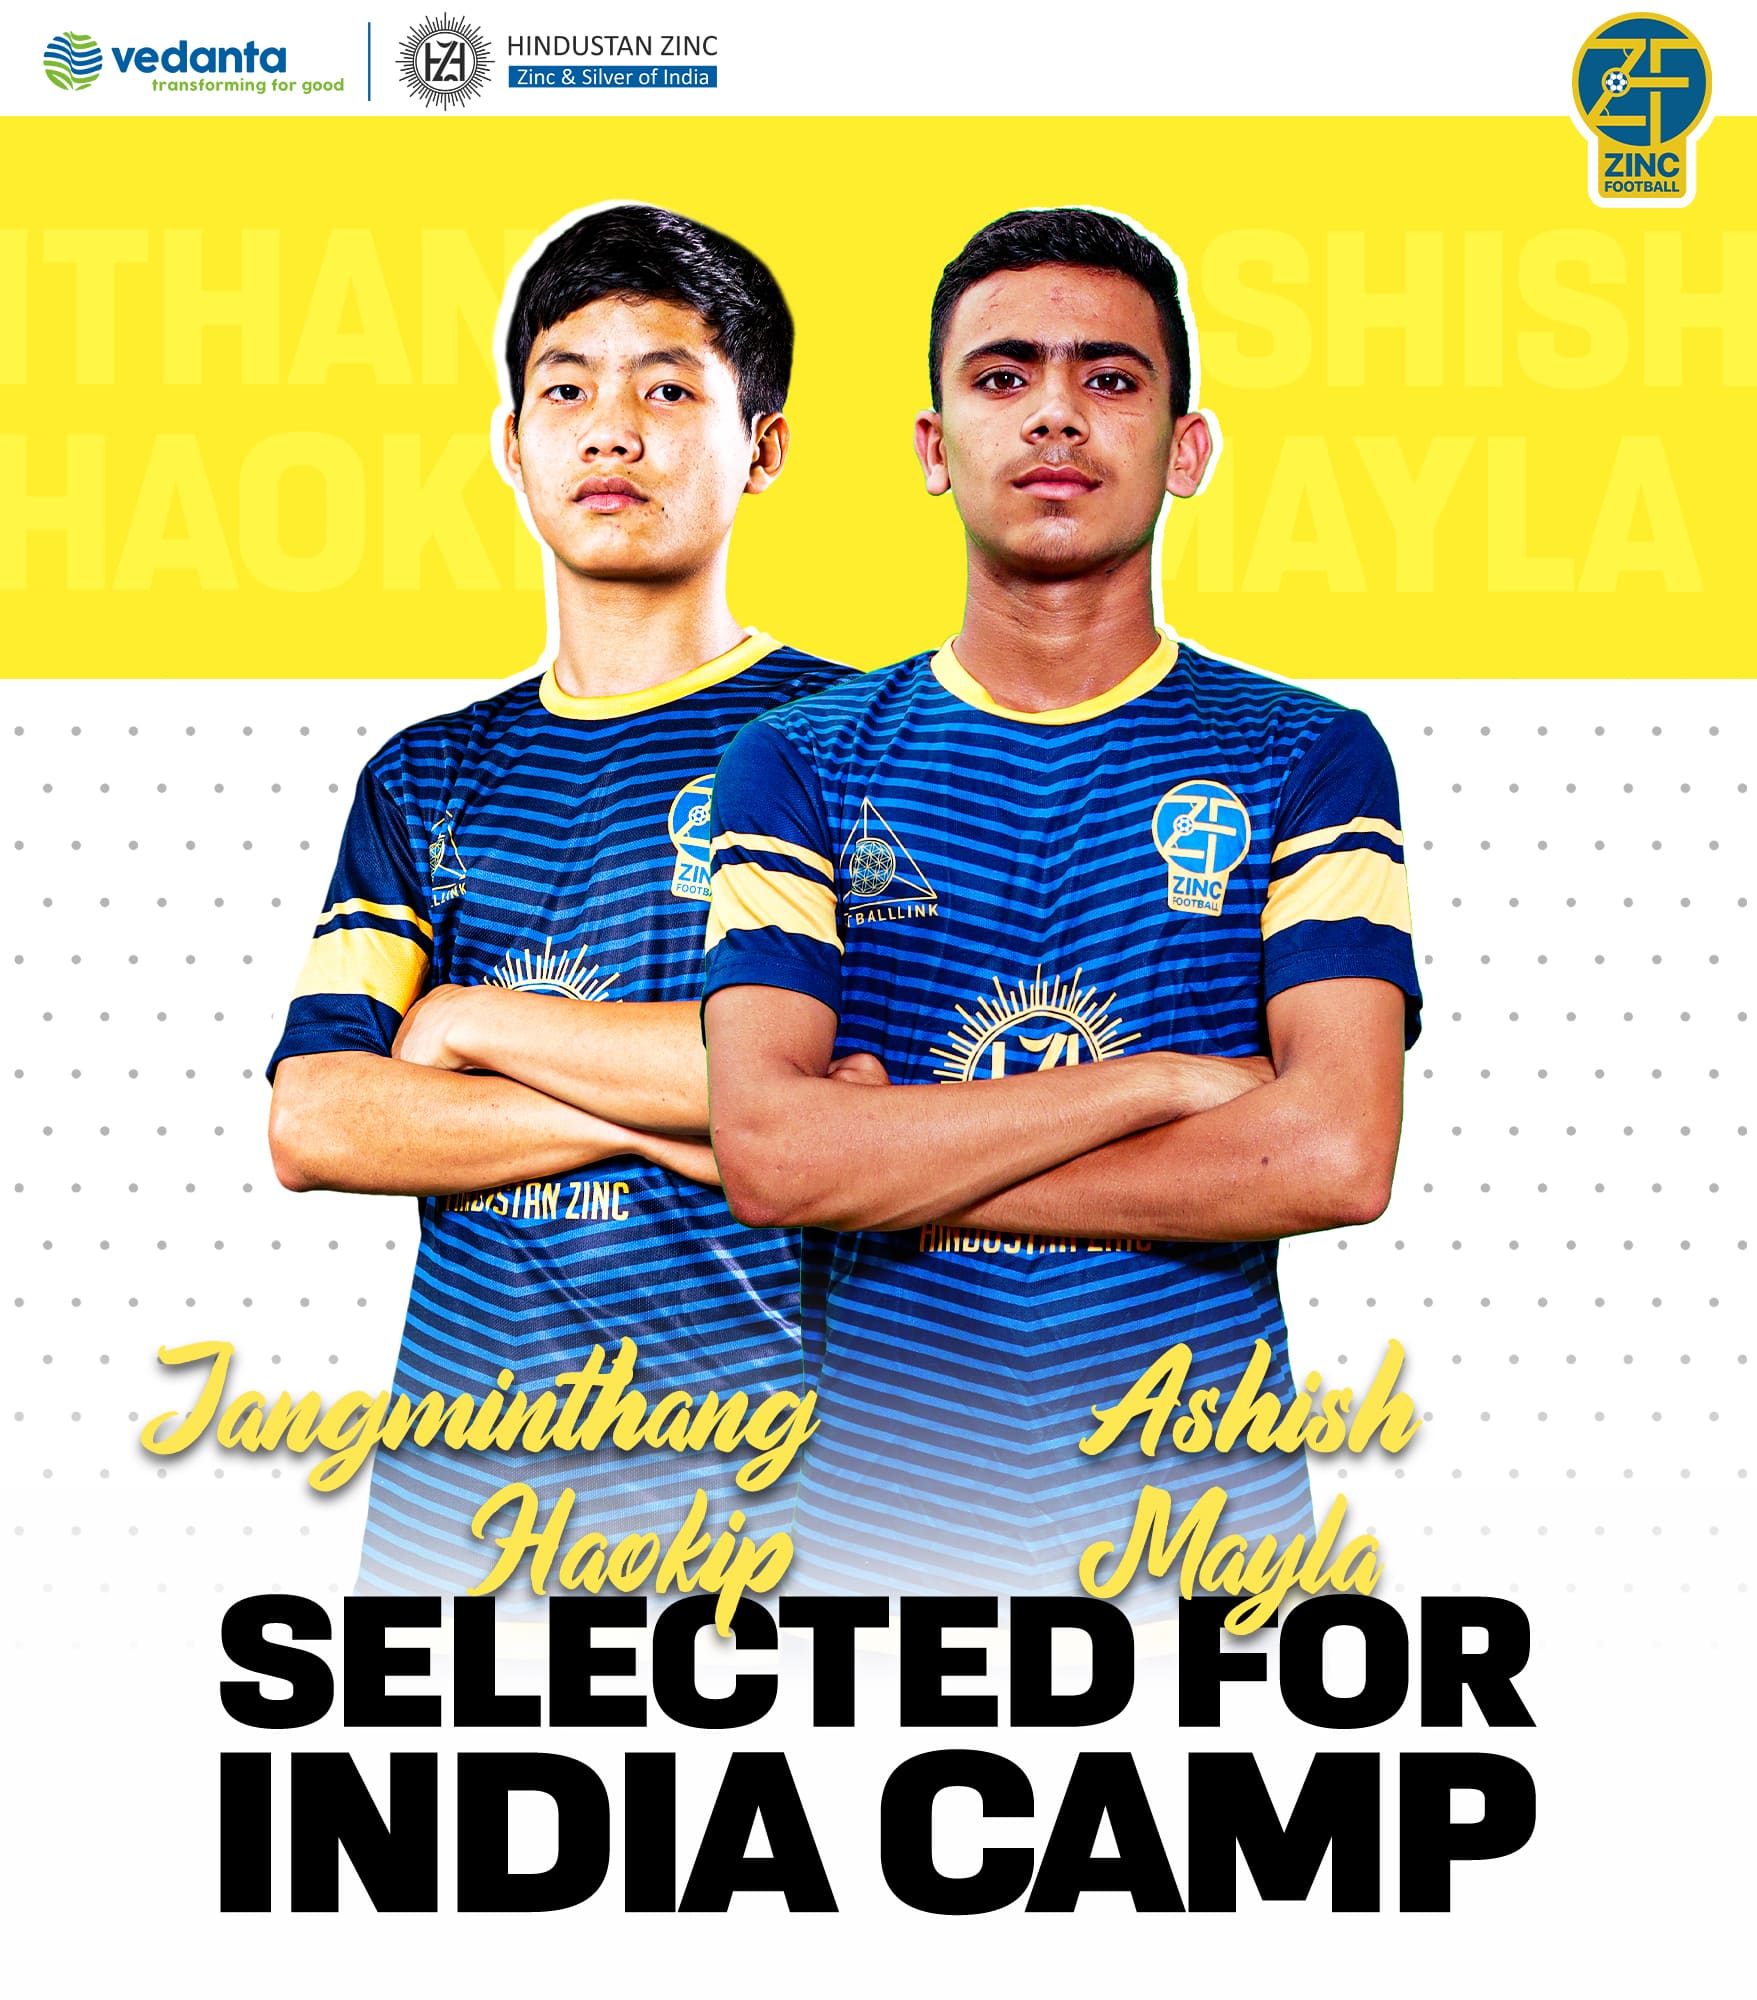 TWO MORE ZINC FOOTBALL ACADEMY PLAYERS SELECTED FOR INDIA CAMP